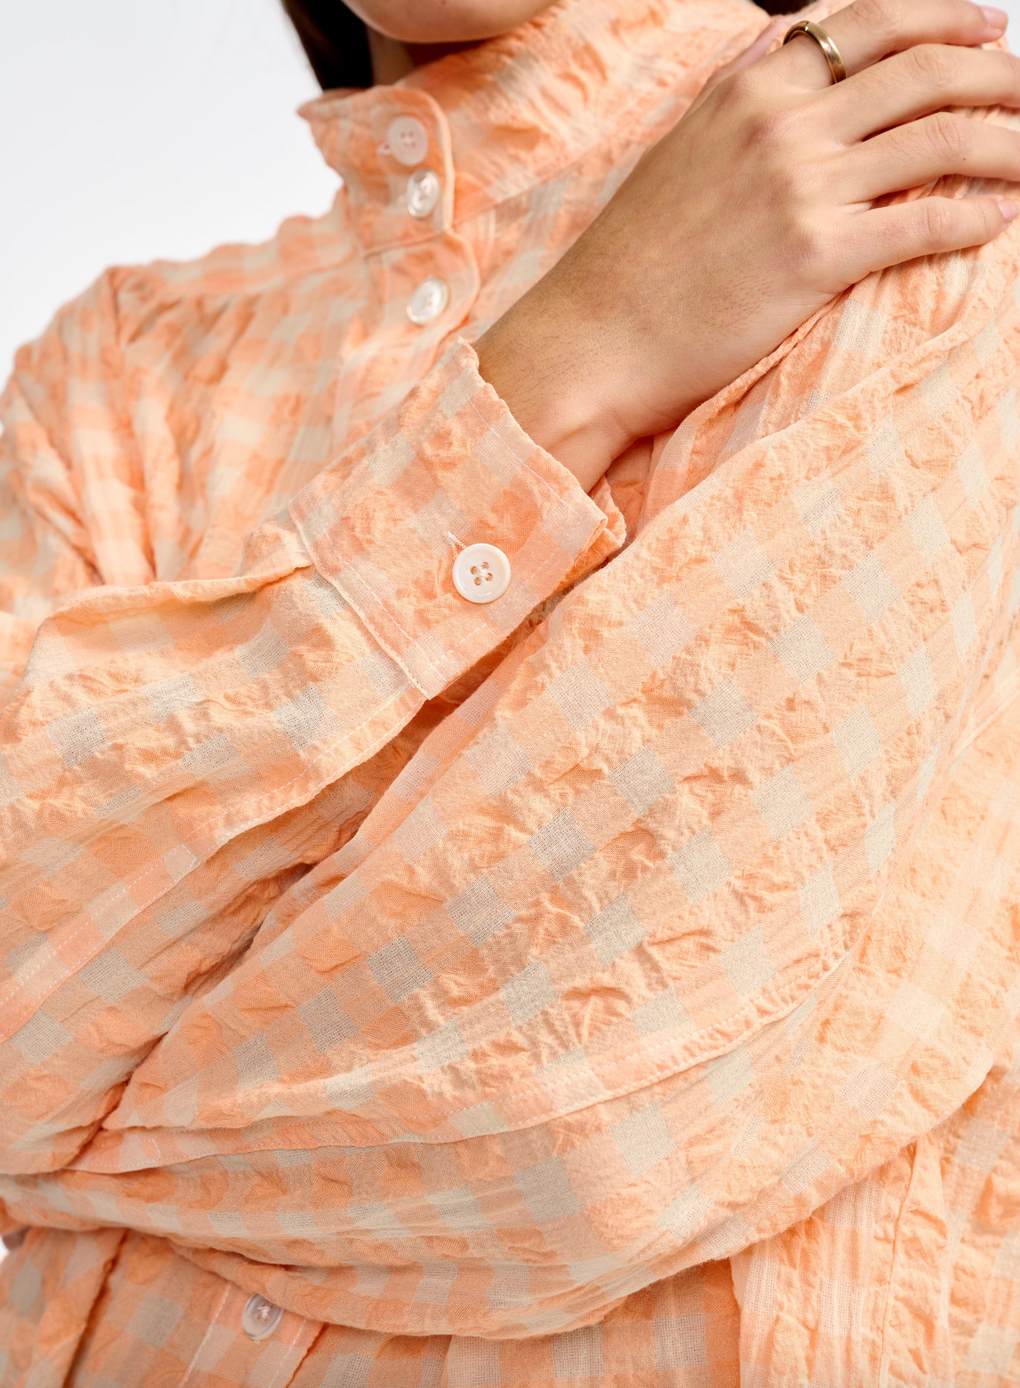 peachy blouse in check